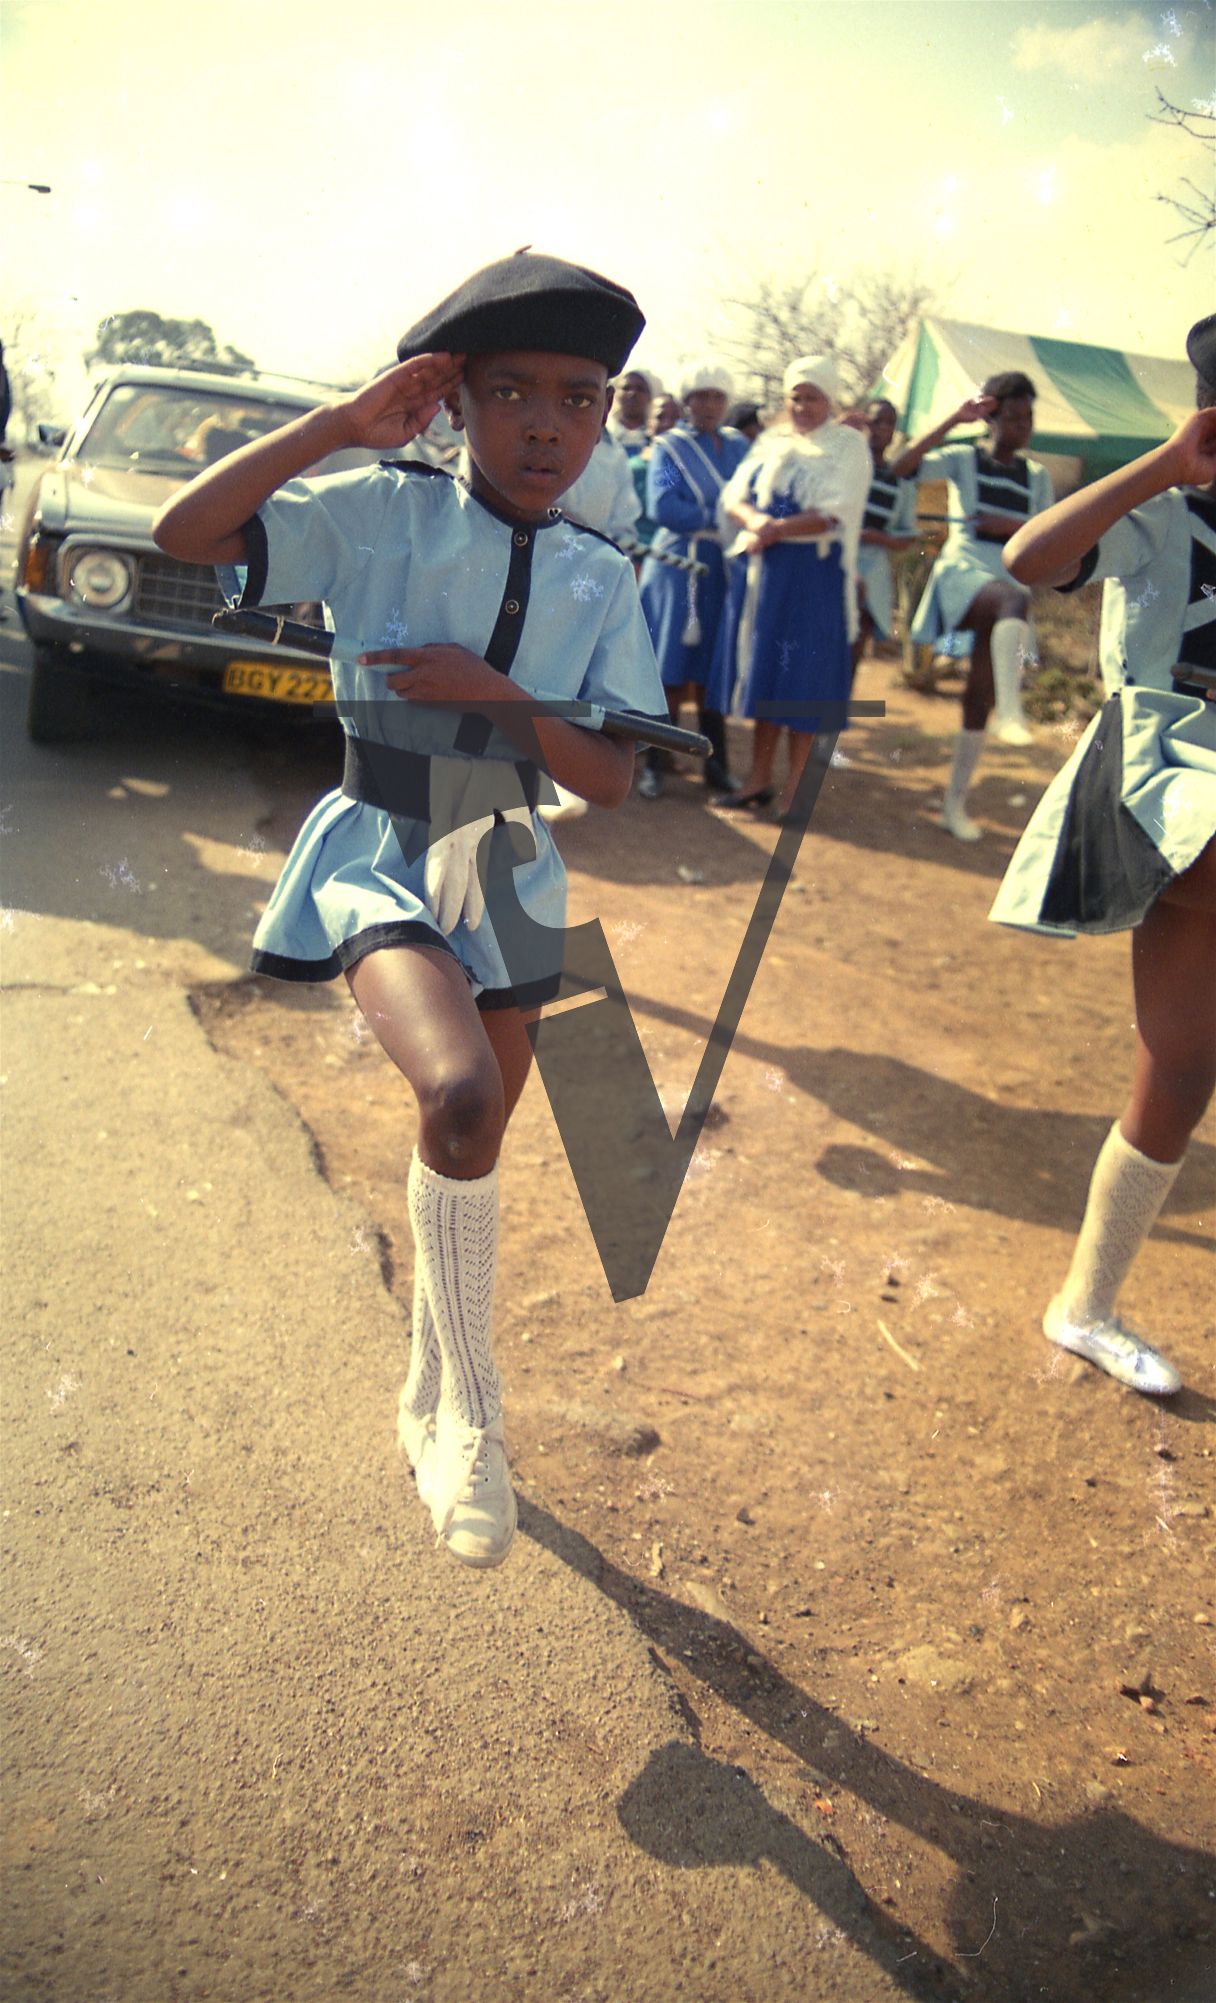 South Africa, girls marching.